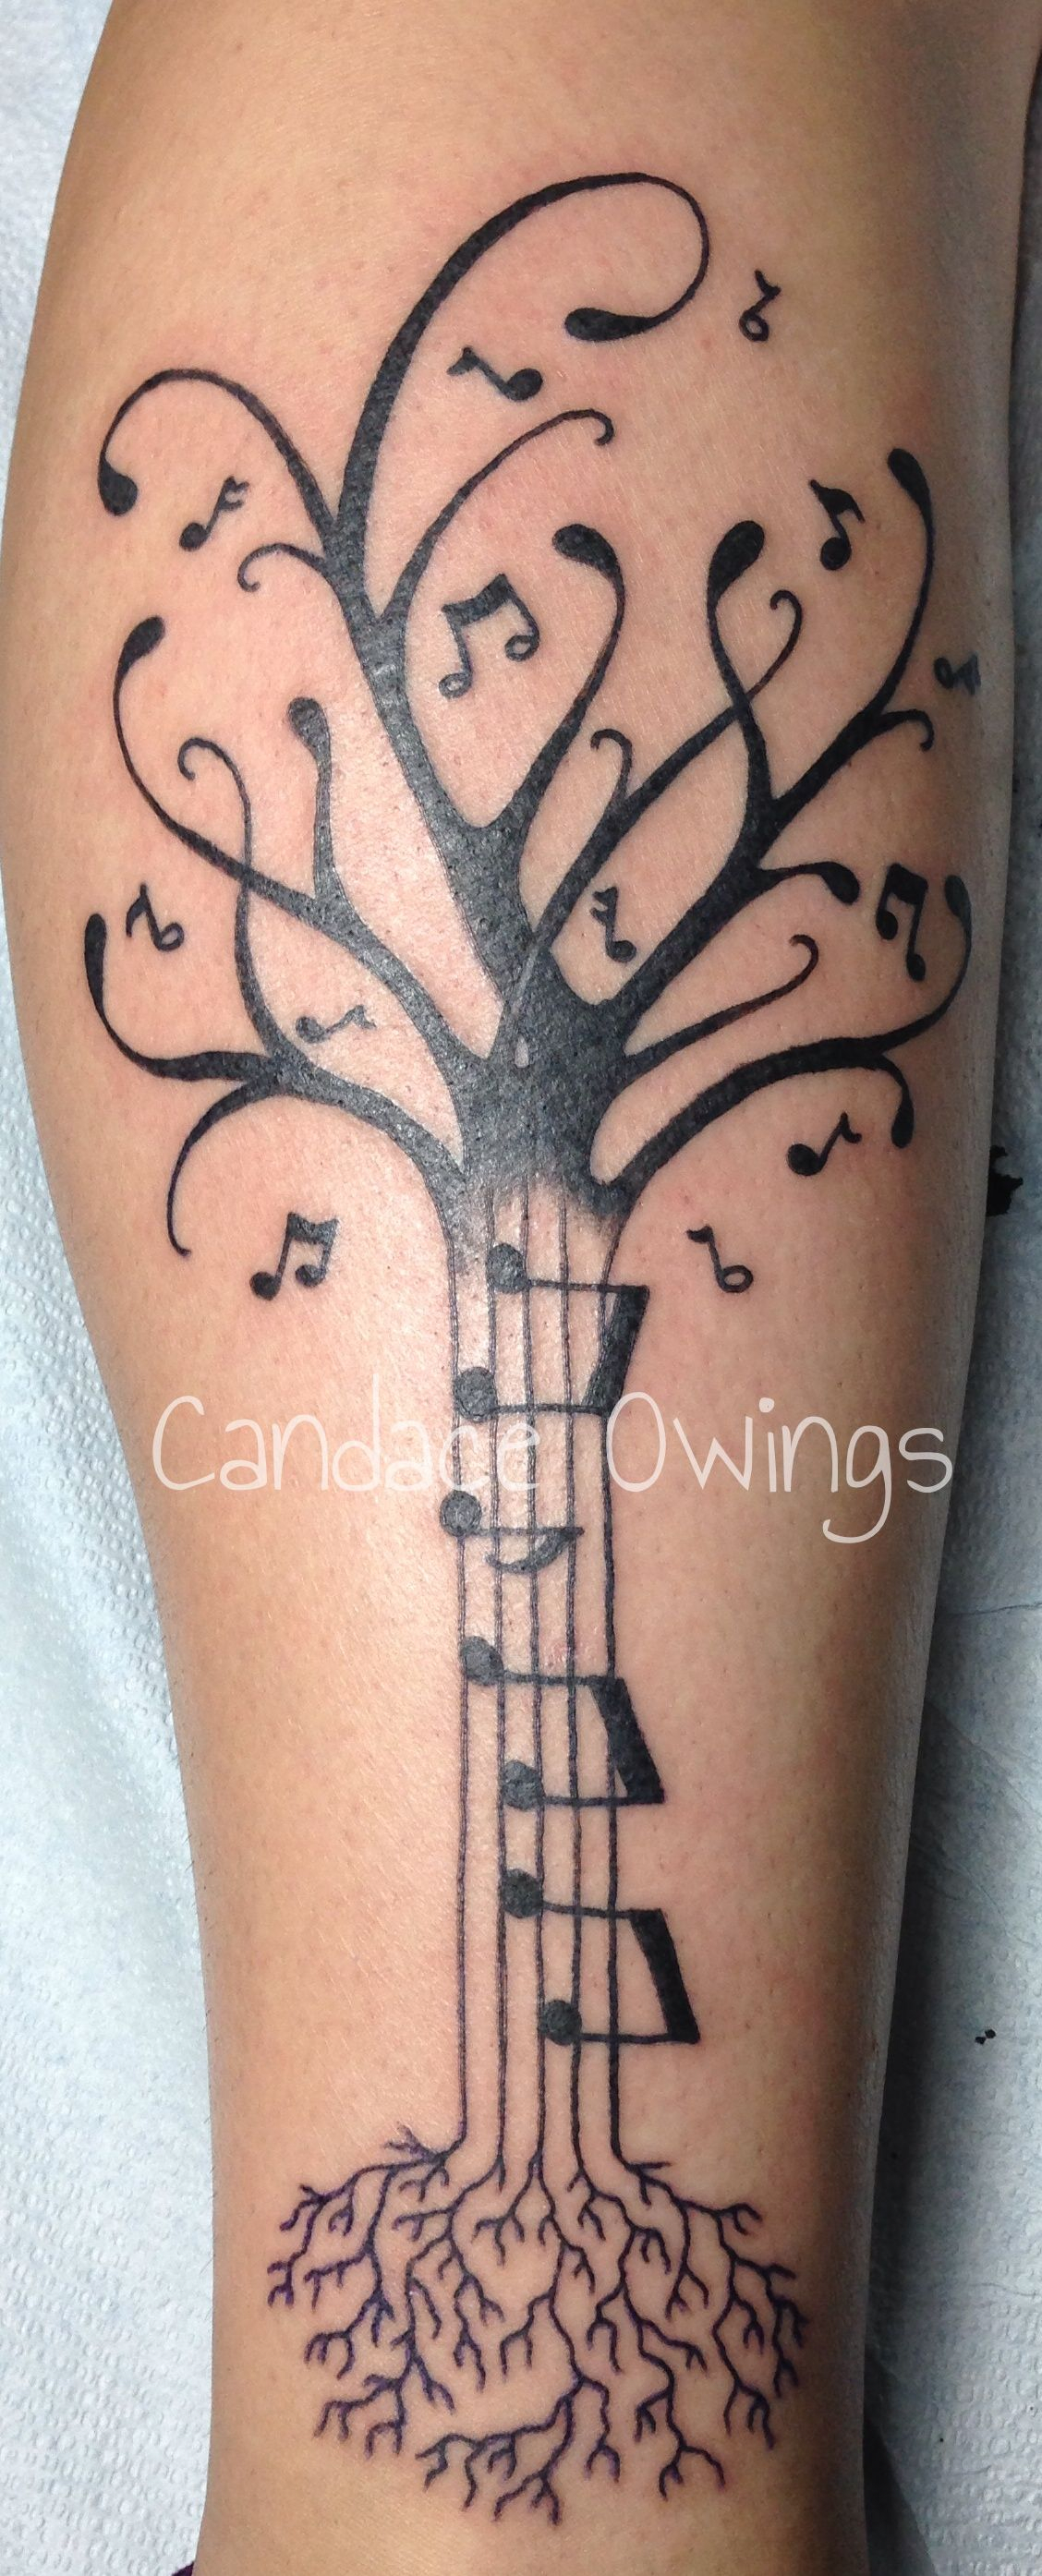 Really Fun Tattoo I Did Of A Music Tree With Music Notes For Leaves regarding dimensions 1128 X 2789